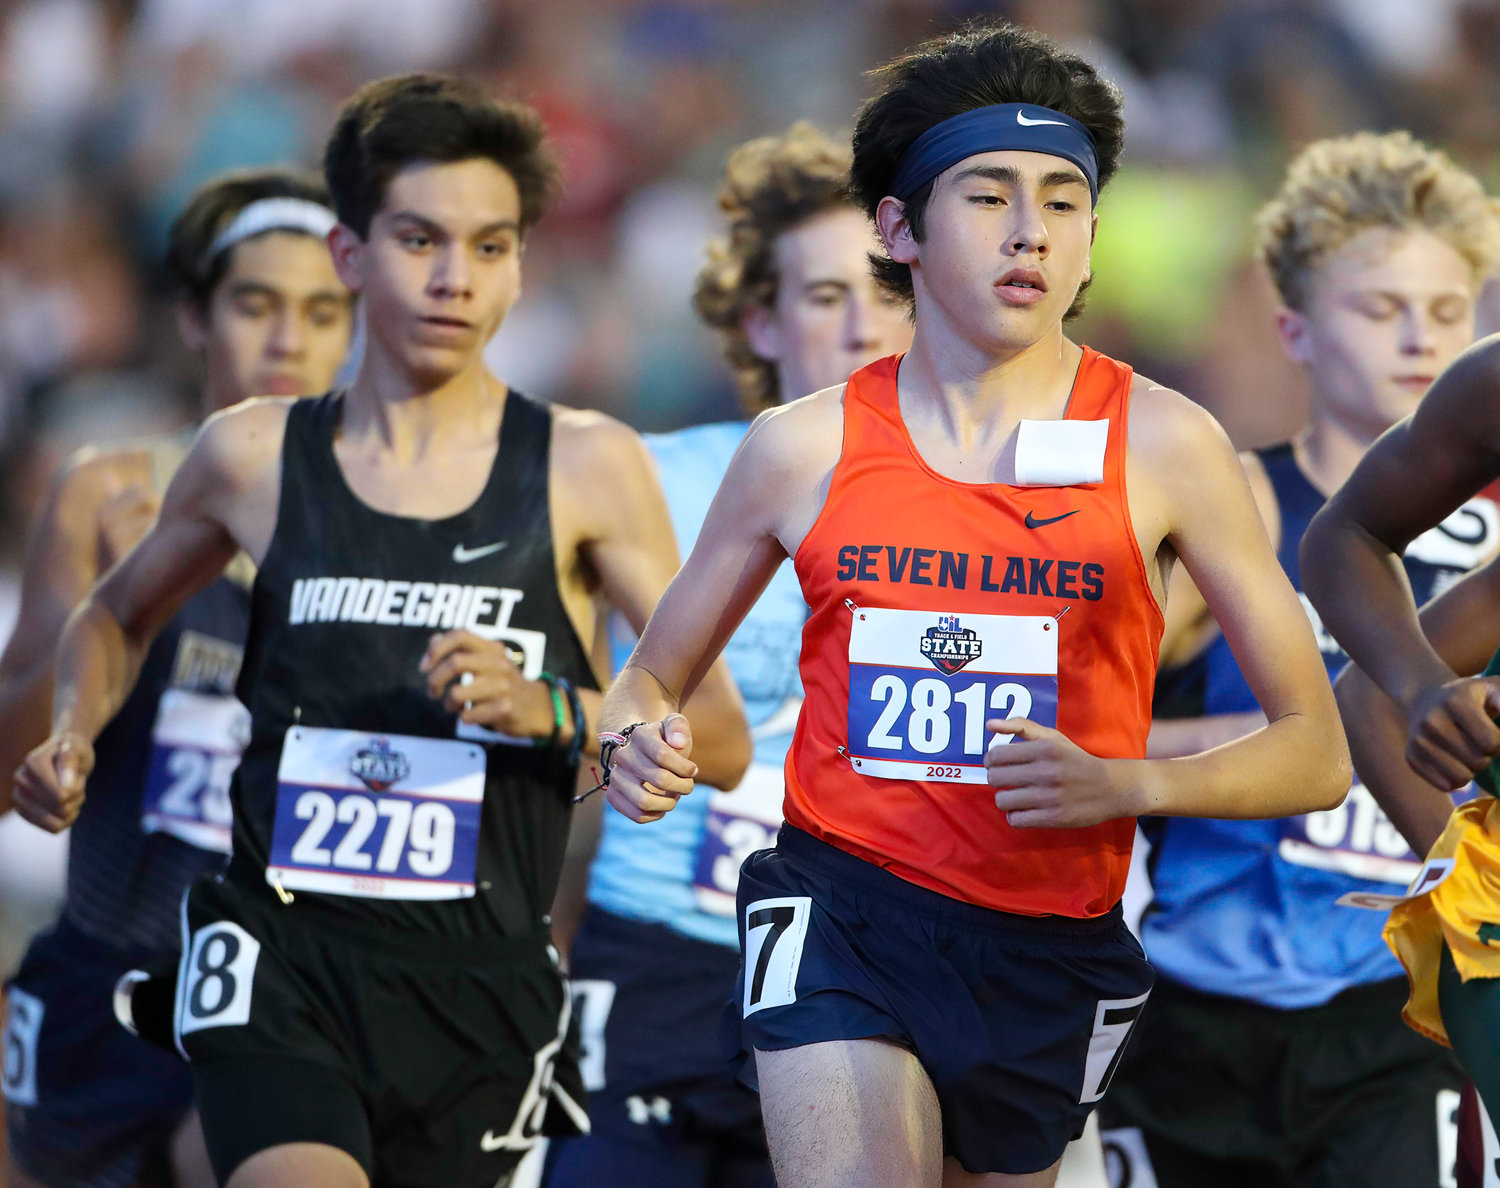 Ruben Rojas of Seven Lakes High School runs in the Class 6A boys 1600-meter run at the UIL State Track and Field Meet on May 14, 2022 in Austin, Texas. Rojas finished third with a time of 4:08.76.